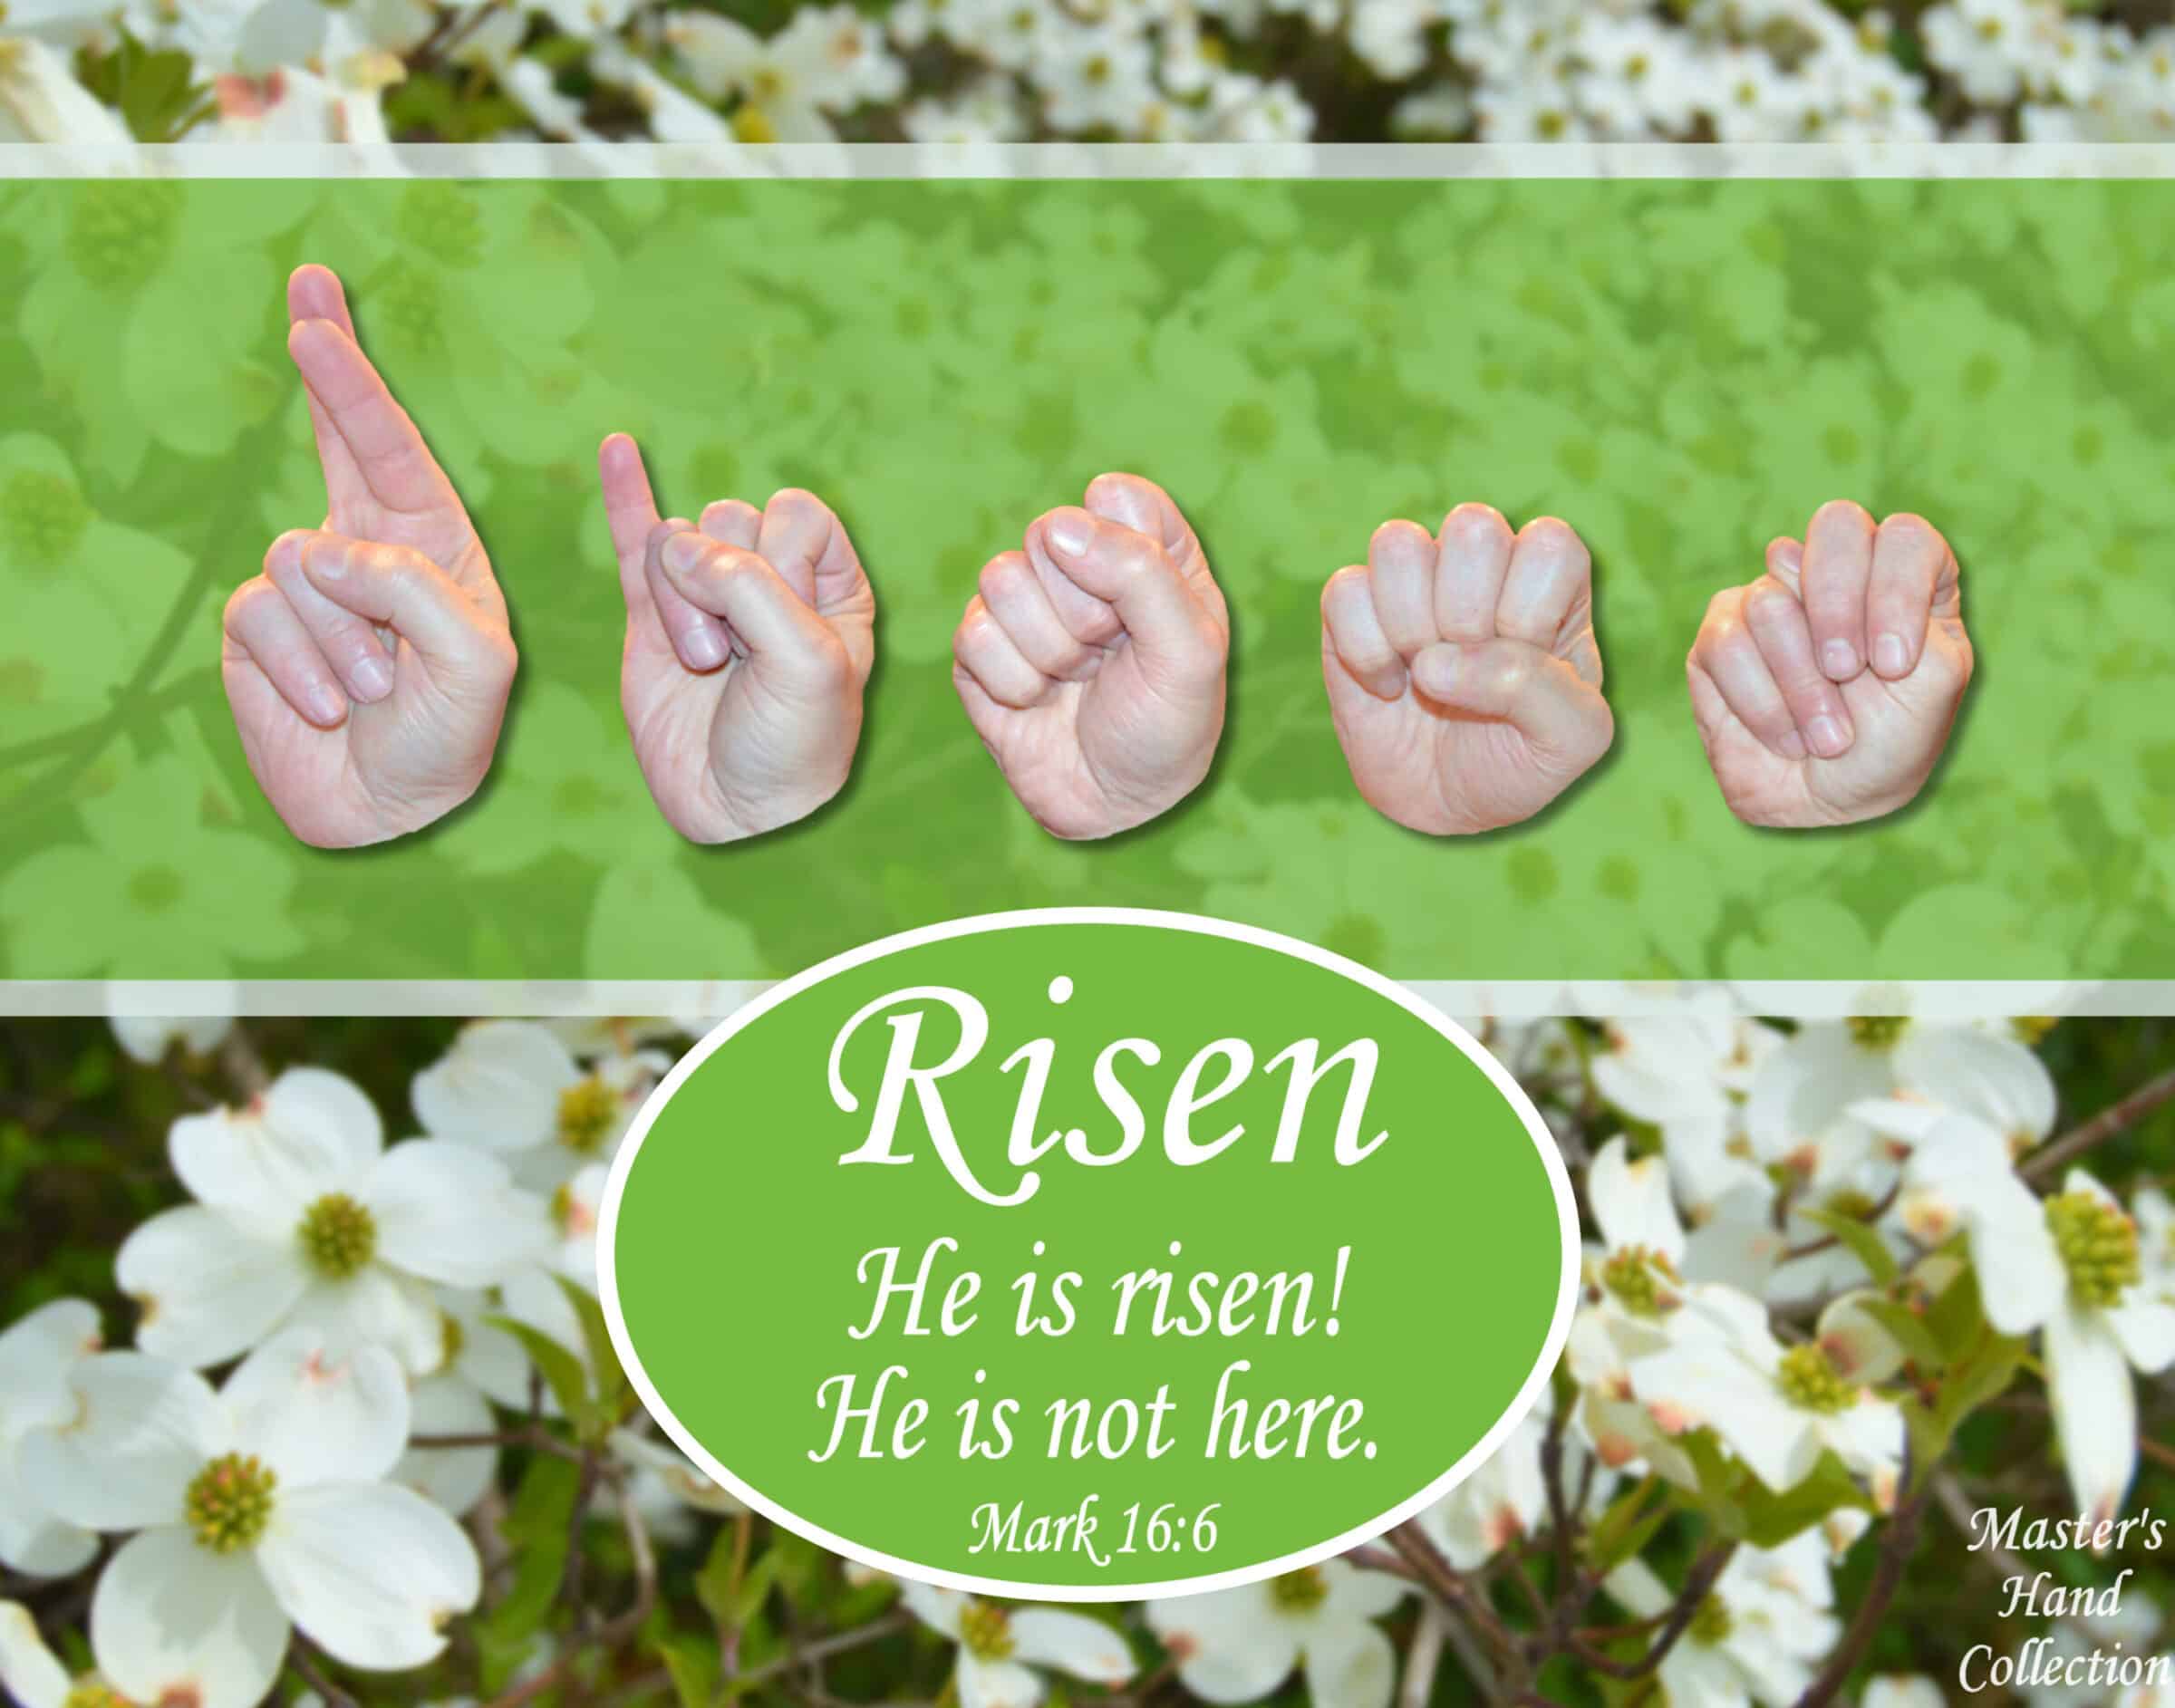 He is Risen Art by Master's Hand Collection